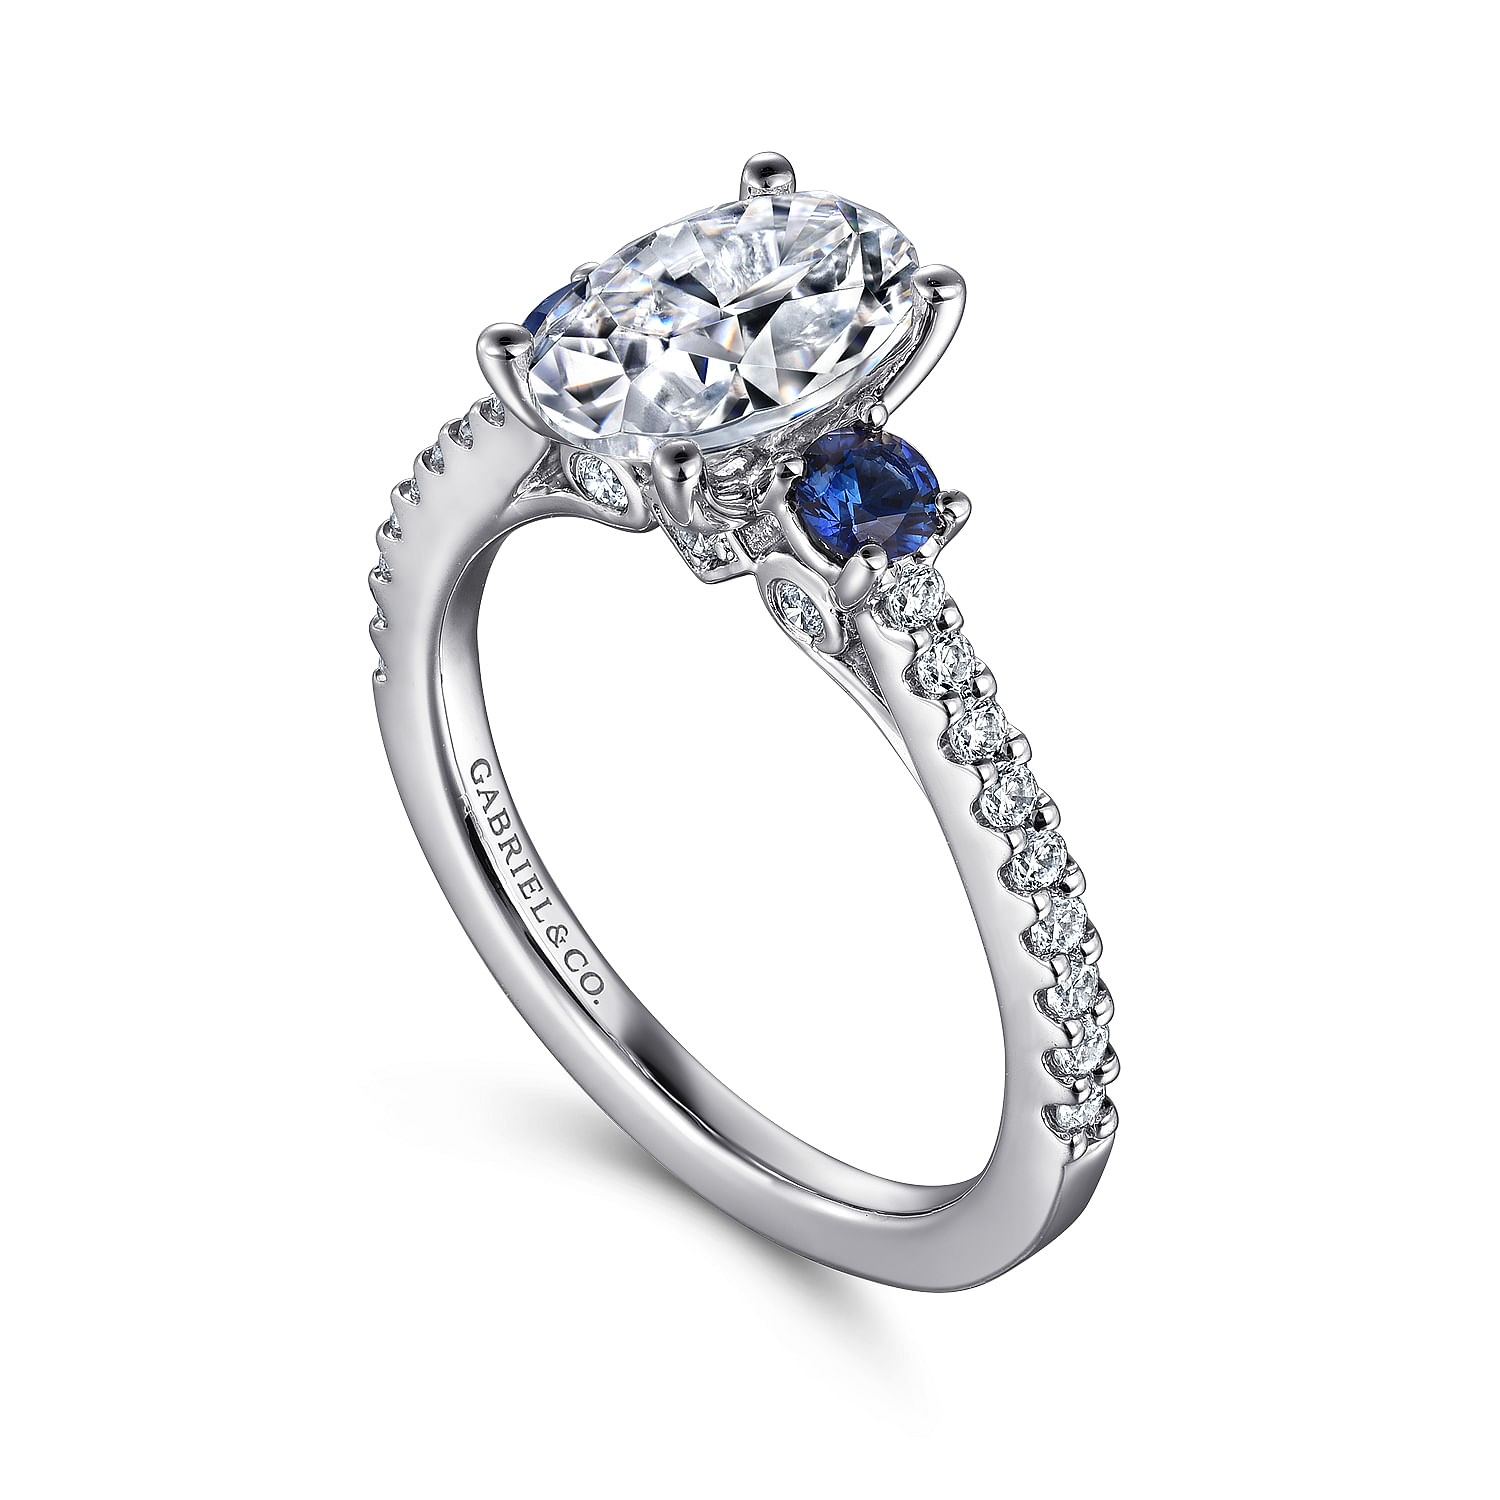 14K White Gold Oval Three Stone Sapphire and Diamond Engagement Ring